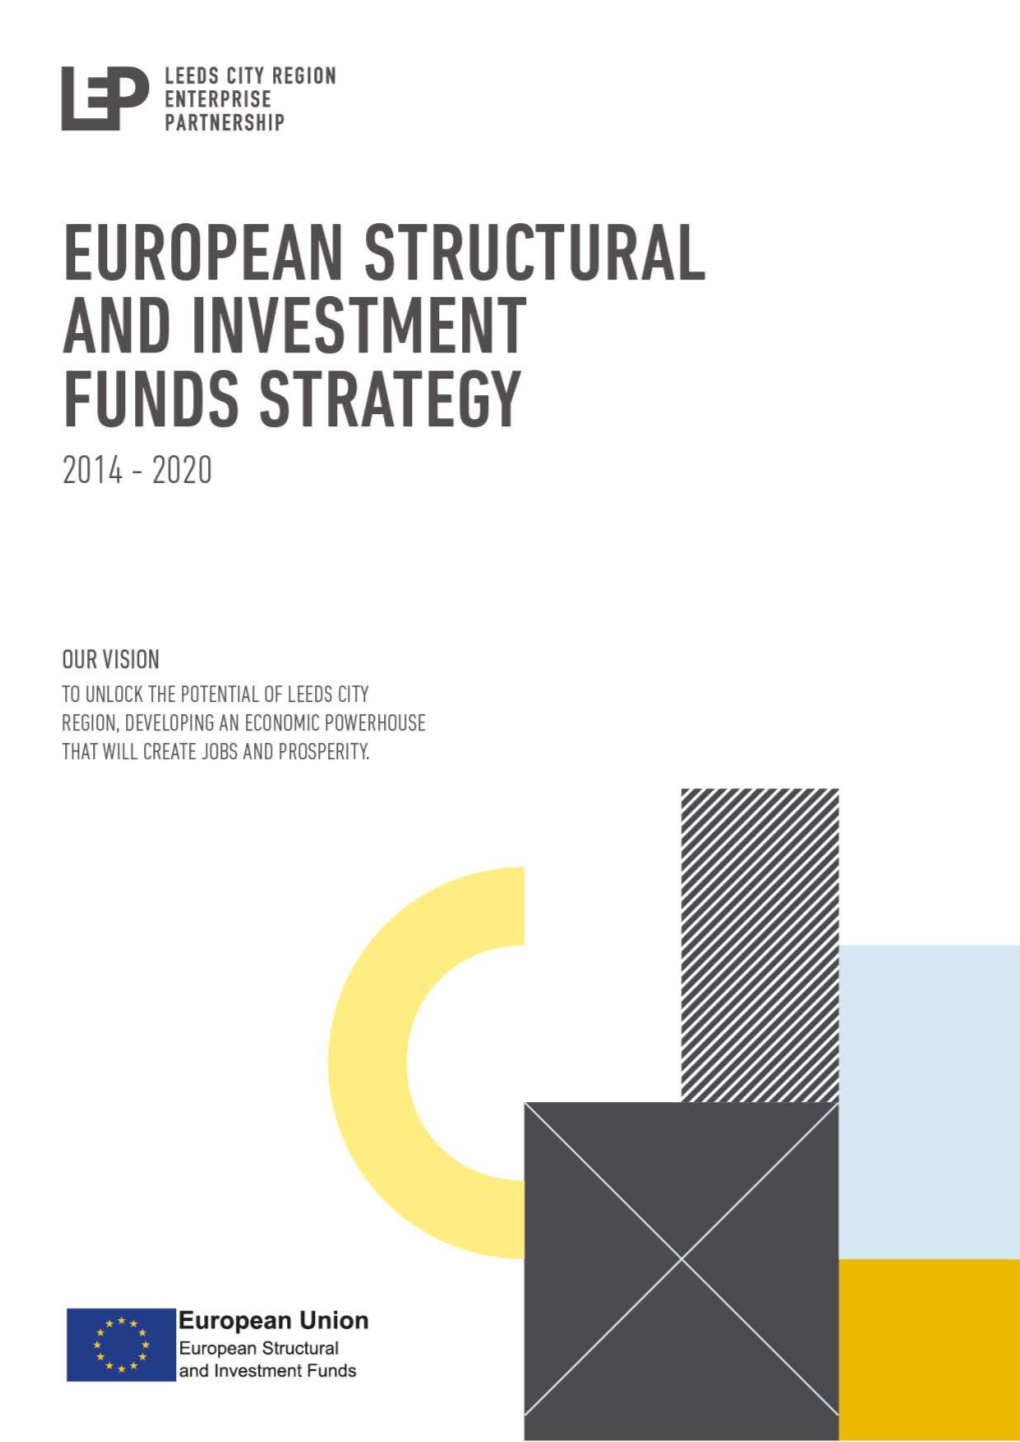 Introduction to the European Structural and Investment Fund Strategy